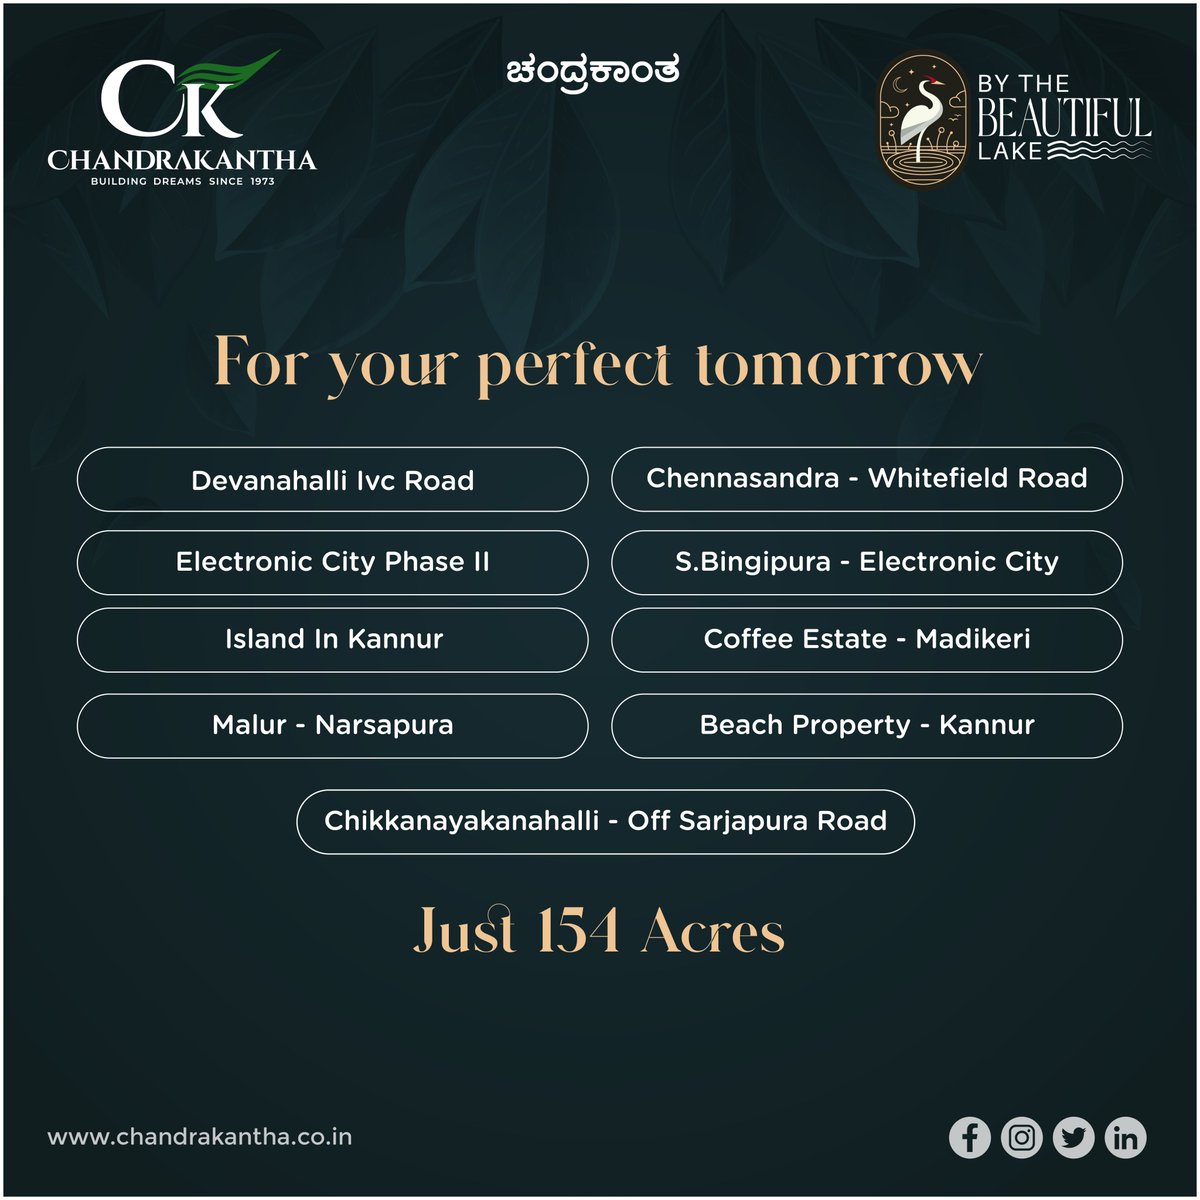 With over 150 acres of land bank currently, we're on the verge of developing some world-class plots for our dear customers.
To know more contact us.
#bythebeautifullake #chandrakanthadevelopers #2bhkvillas #3bhkvillas #lakefrontvillas #lakeview #lakefronthouse #luxuryhomes #house